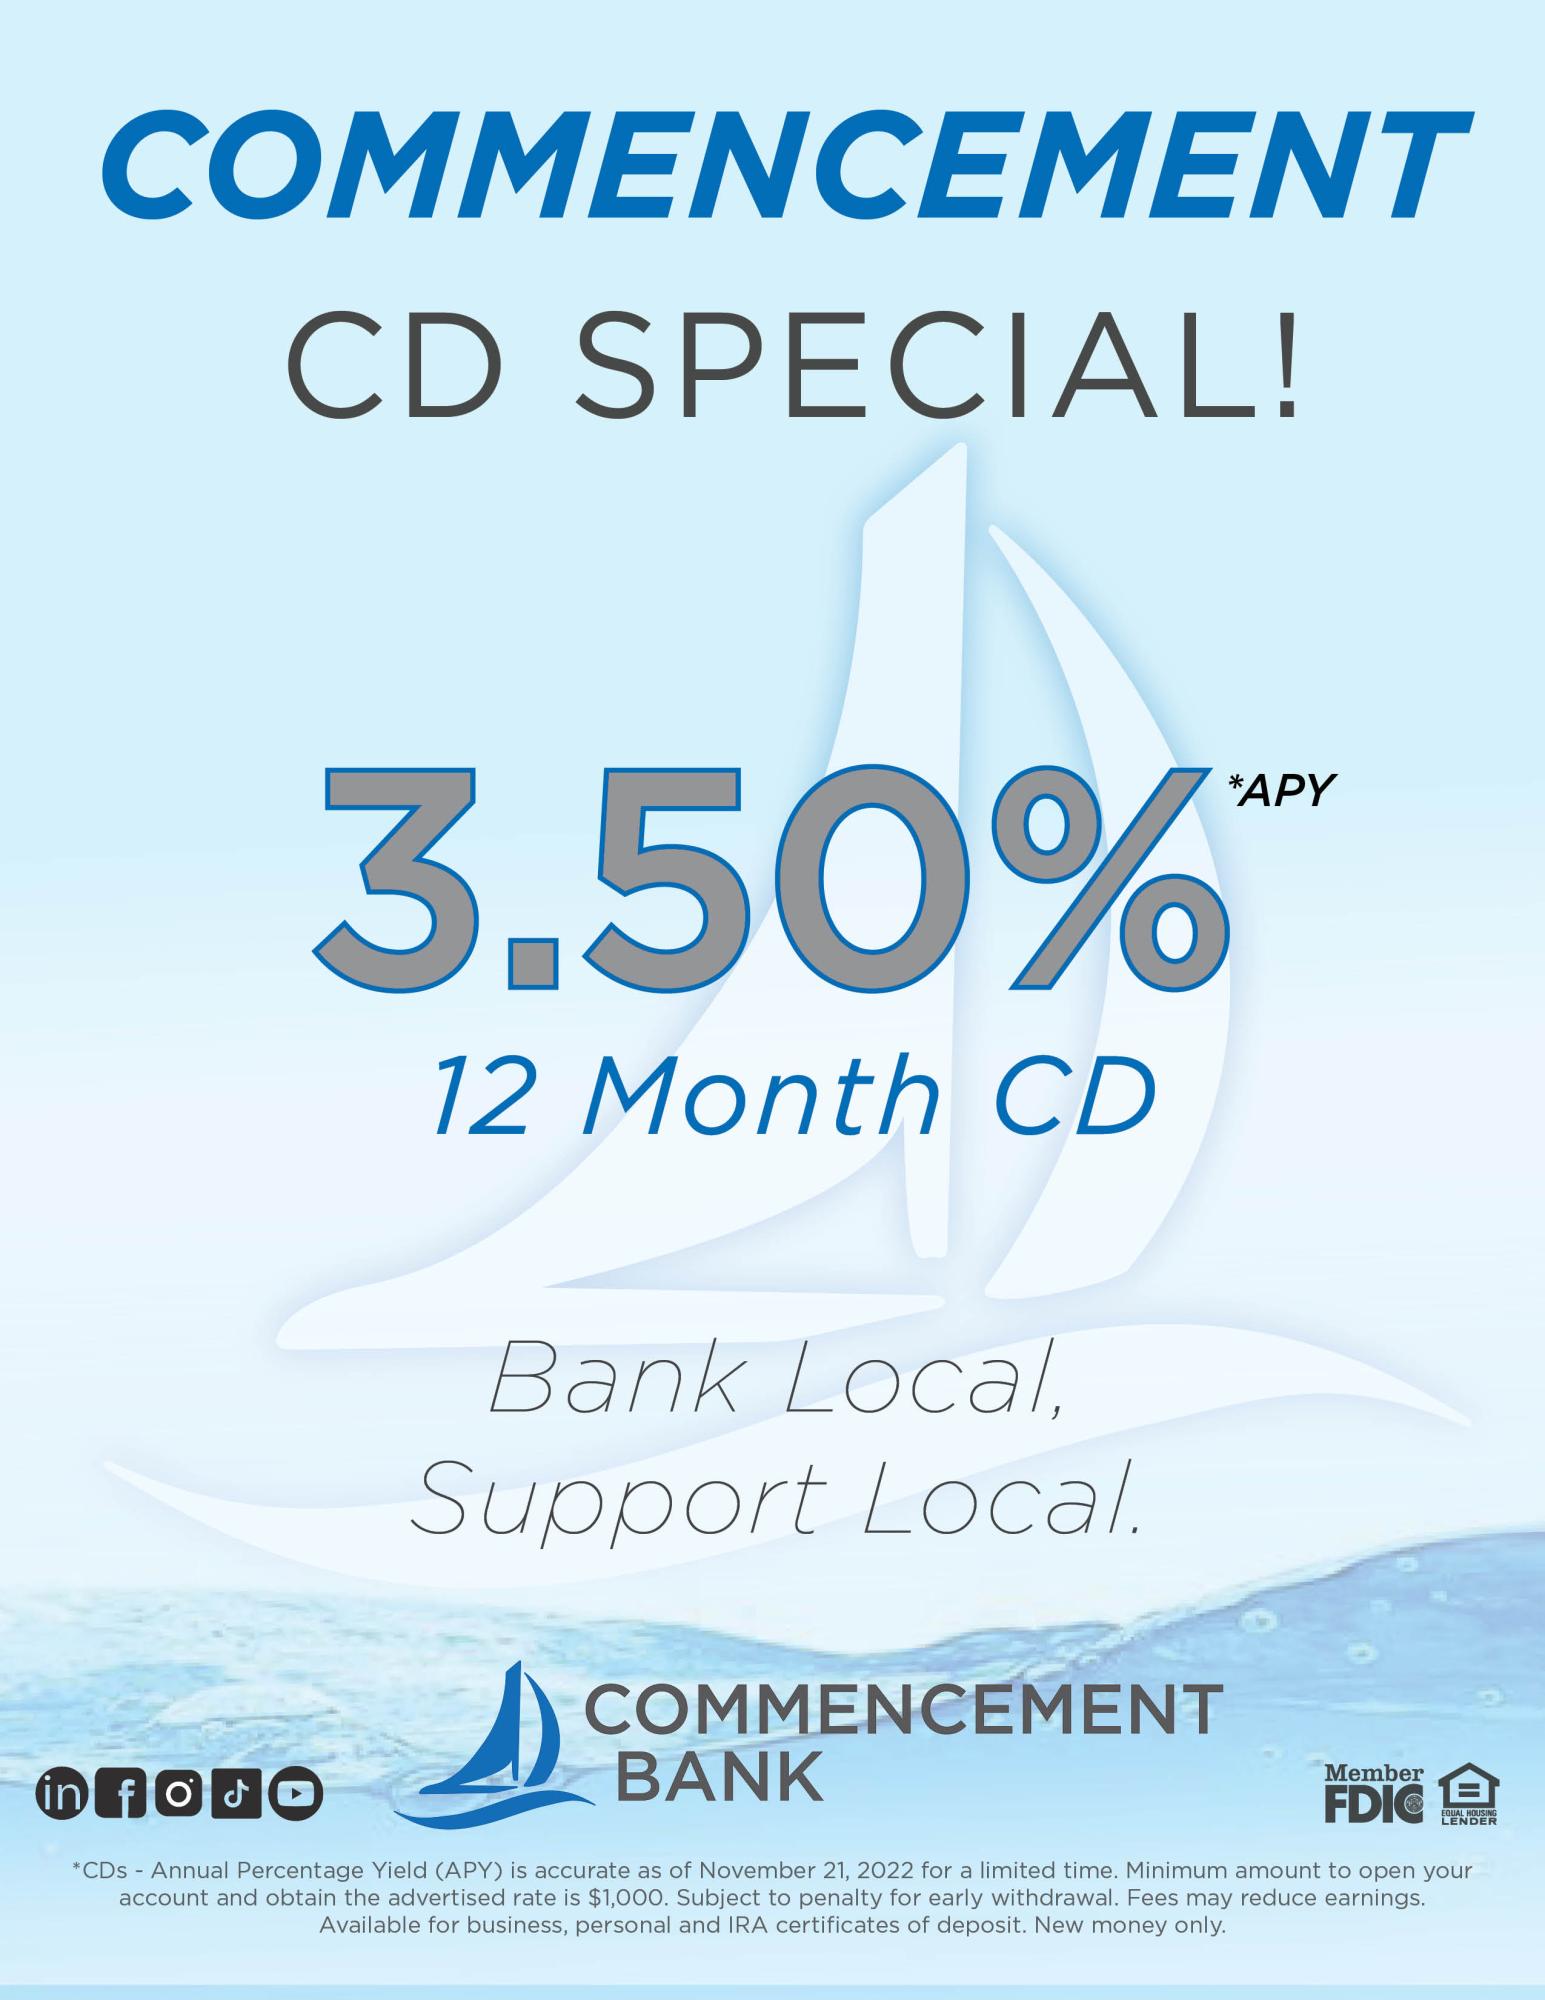 CD Special